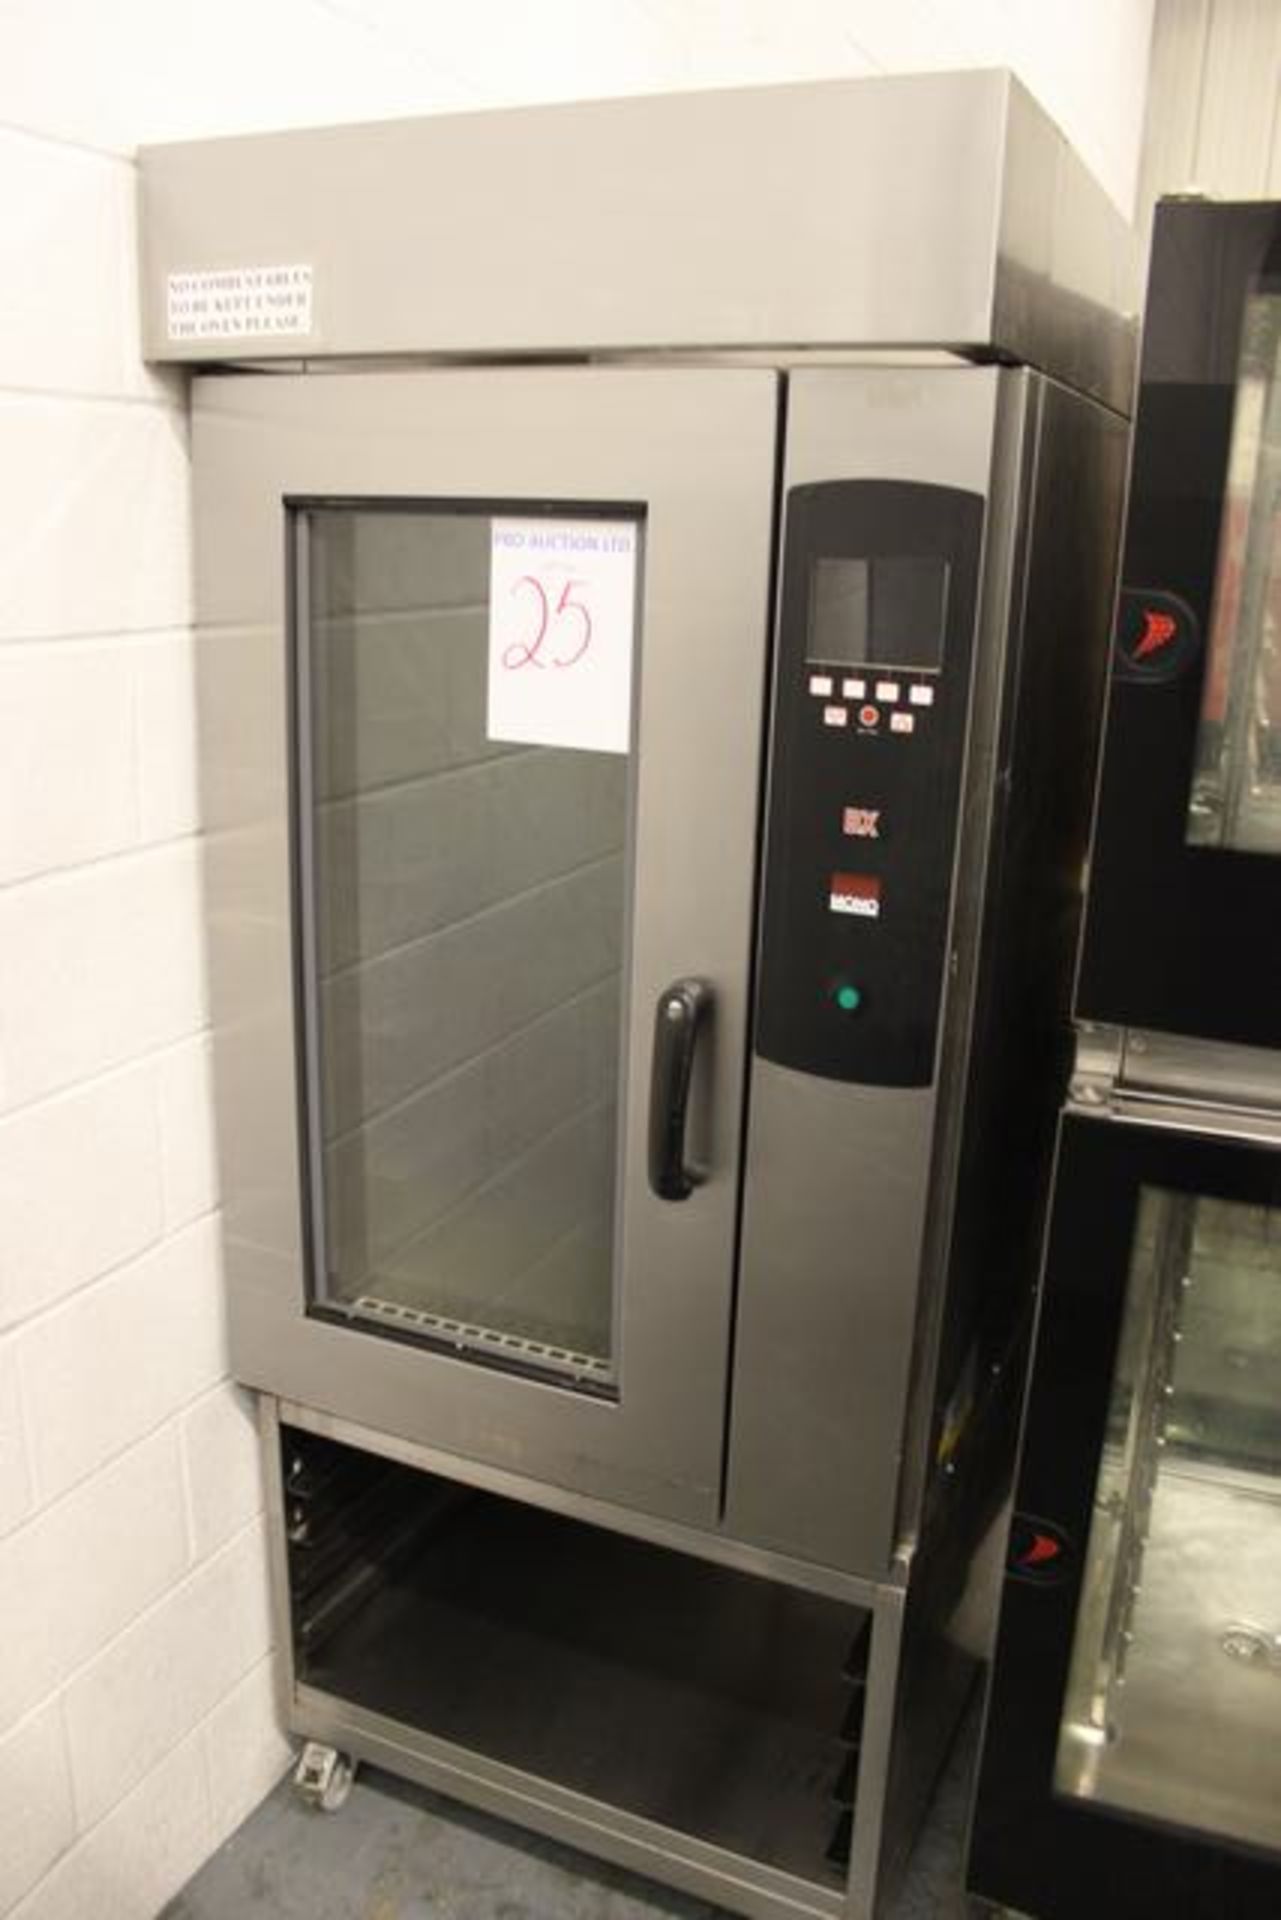 Mono BX type FG150 10 grid bake off oven takes 60 x 40 trays s/n 021997 3 phase - Image 2 of 3